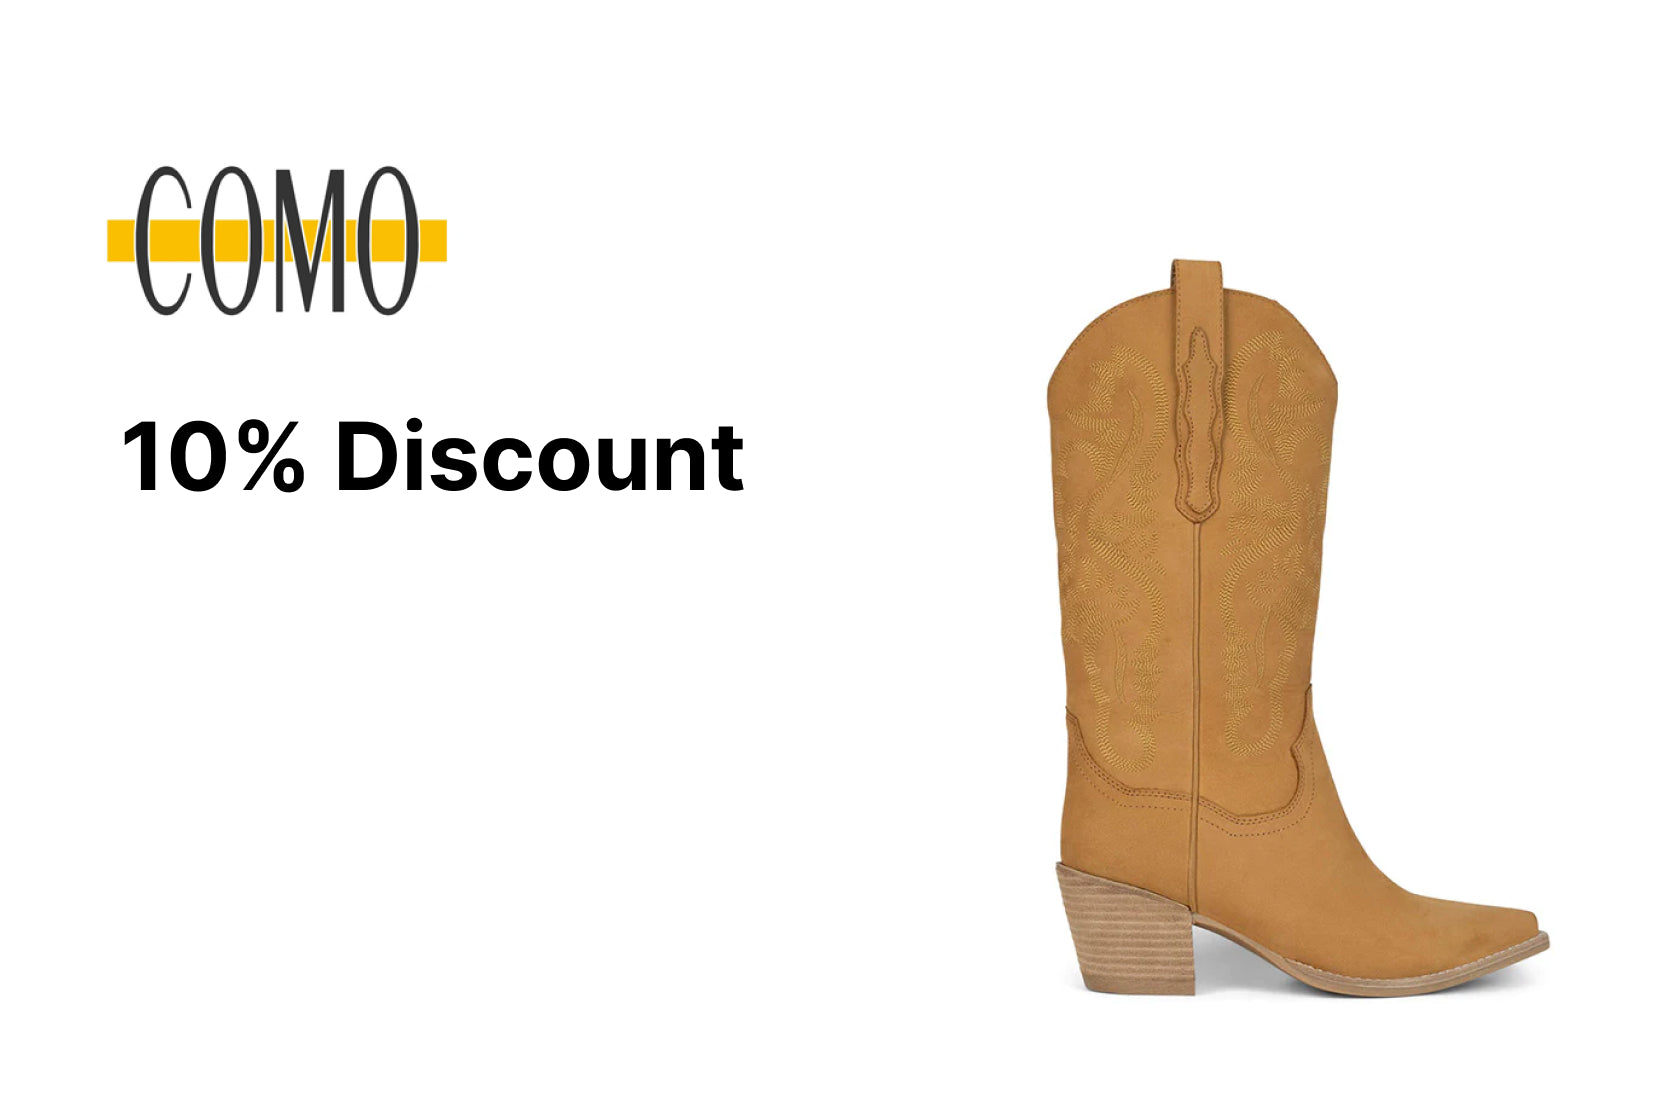 10% off on Cloths, Shoes & Accessories